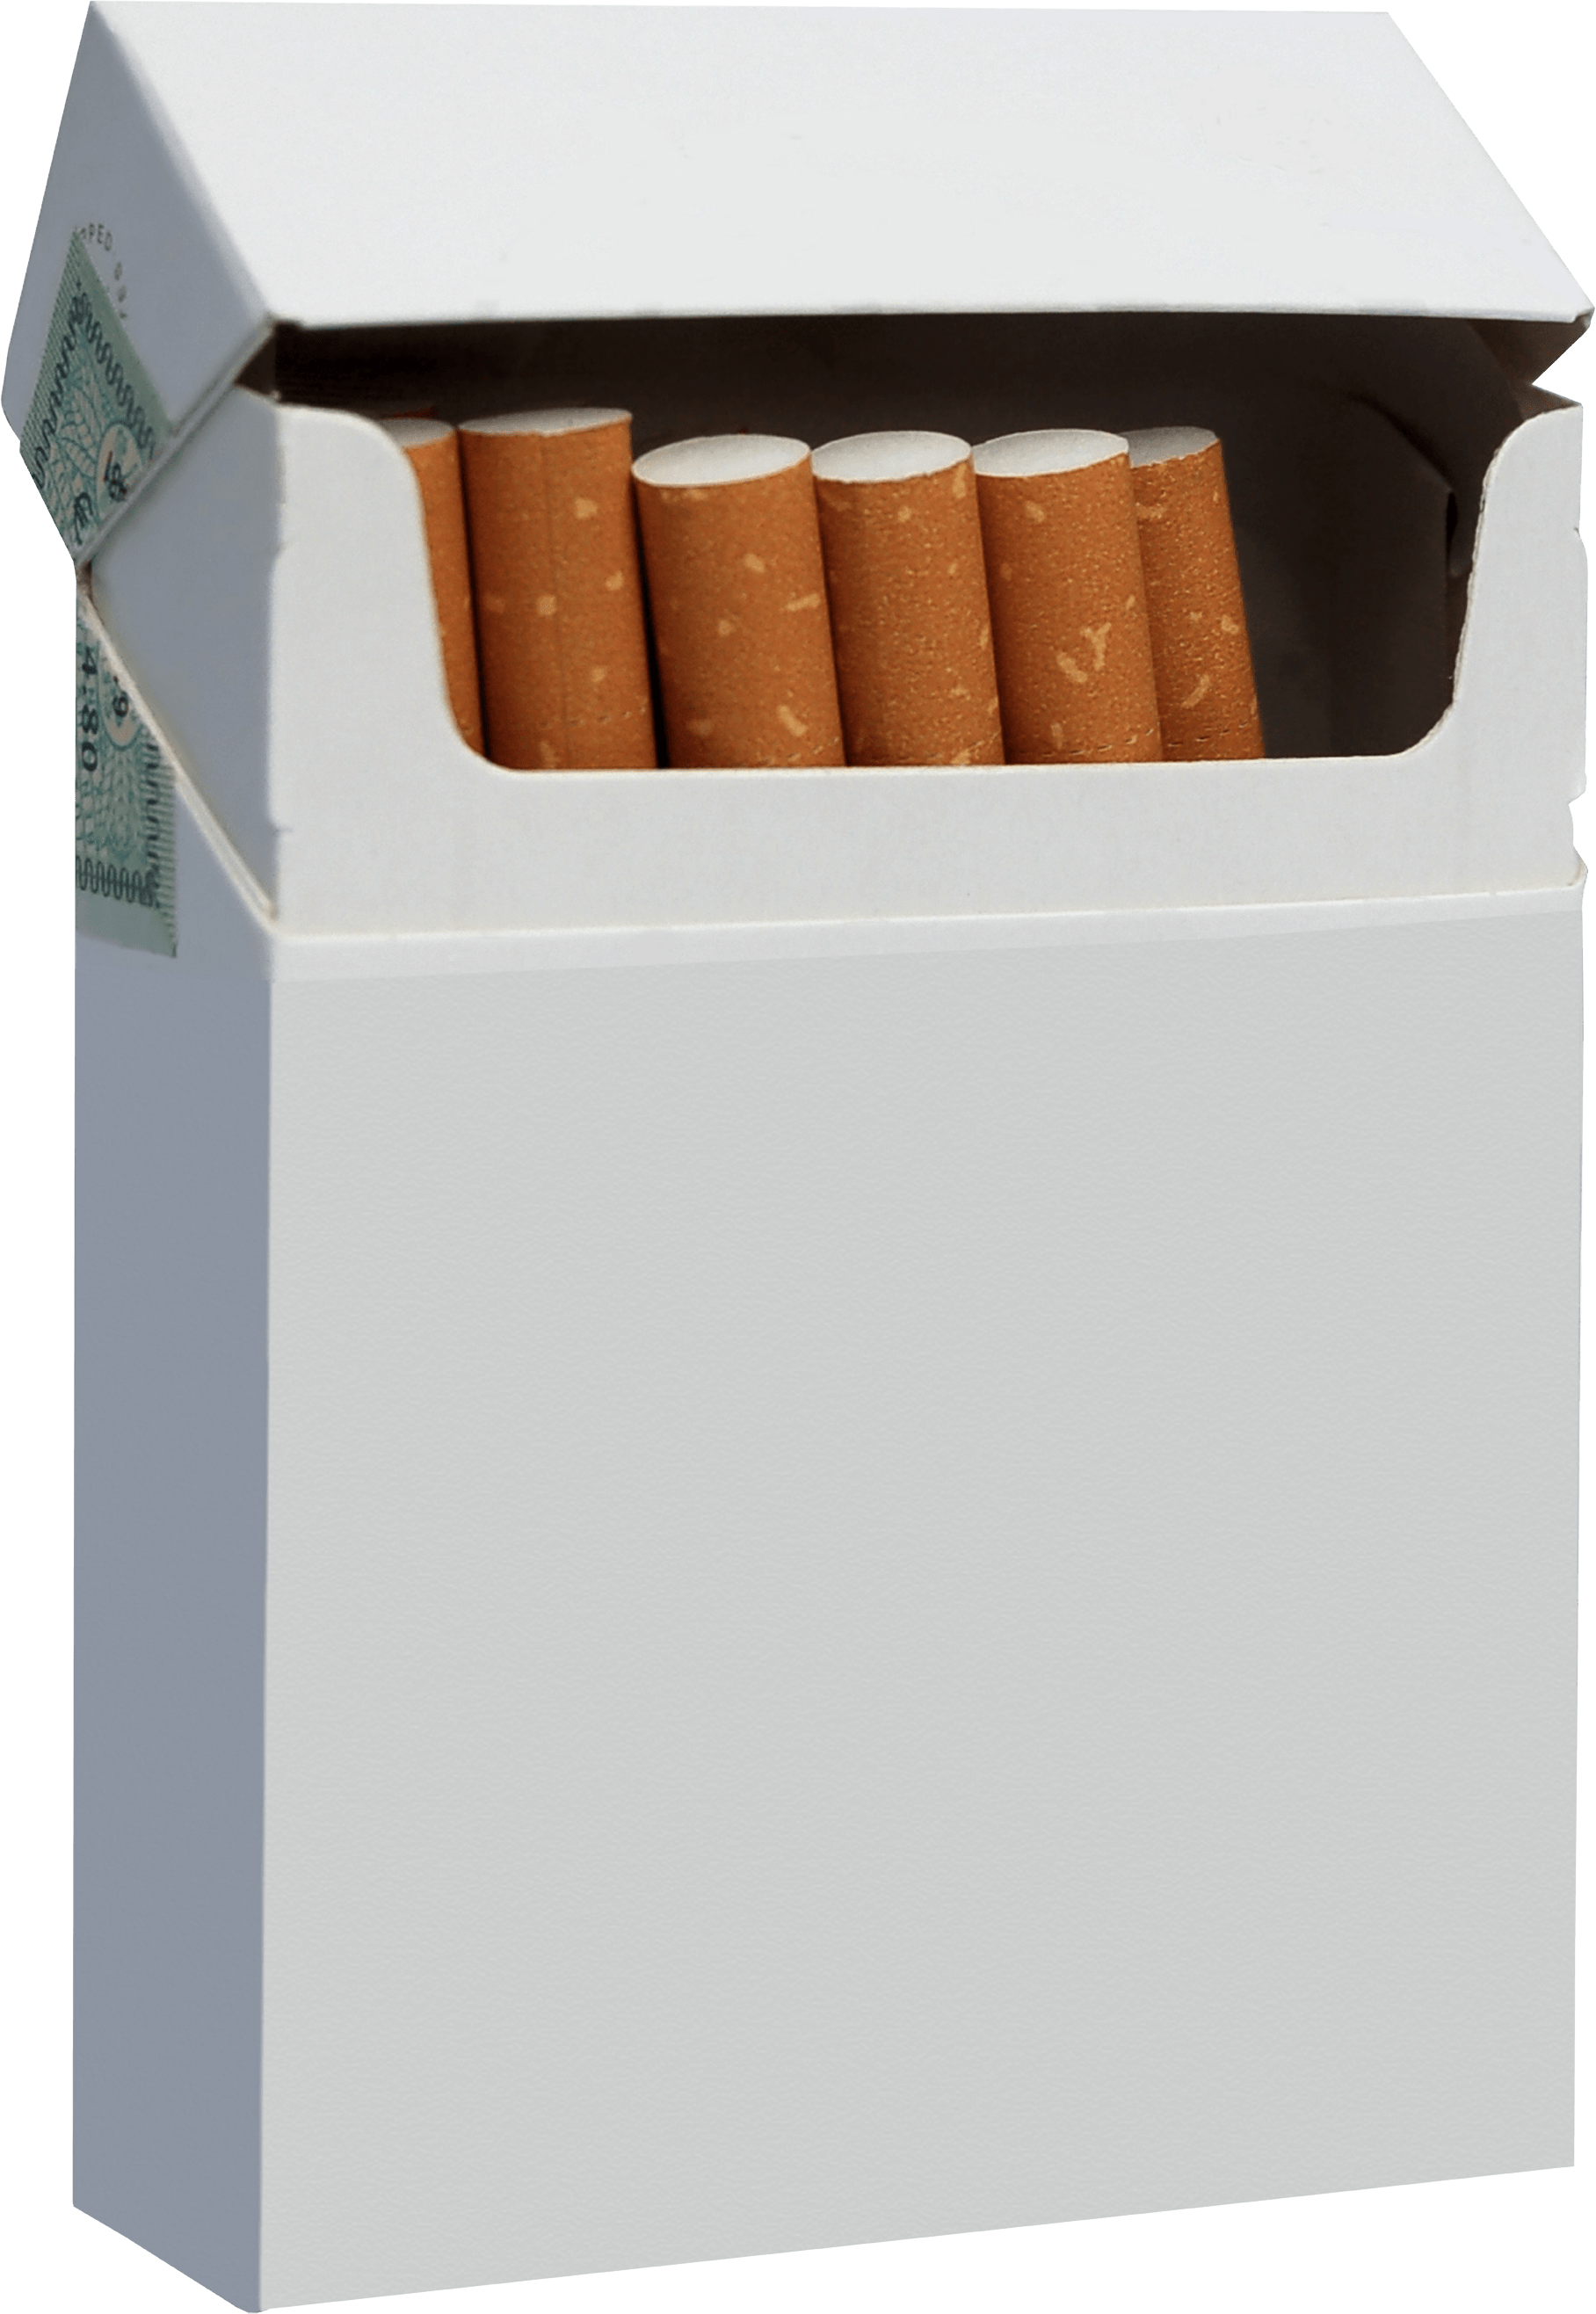 Cigarette Pack PNG-PlusPNG.co